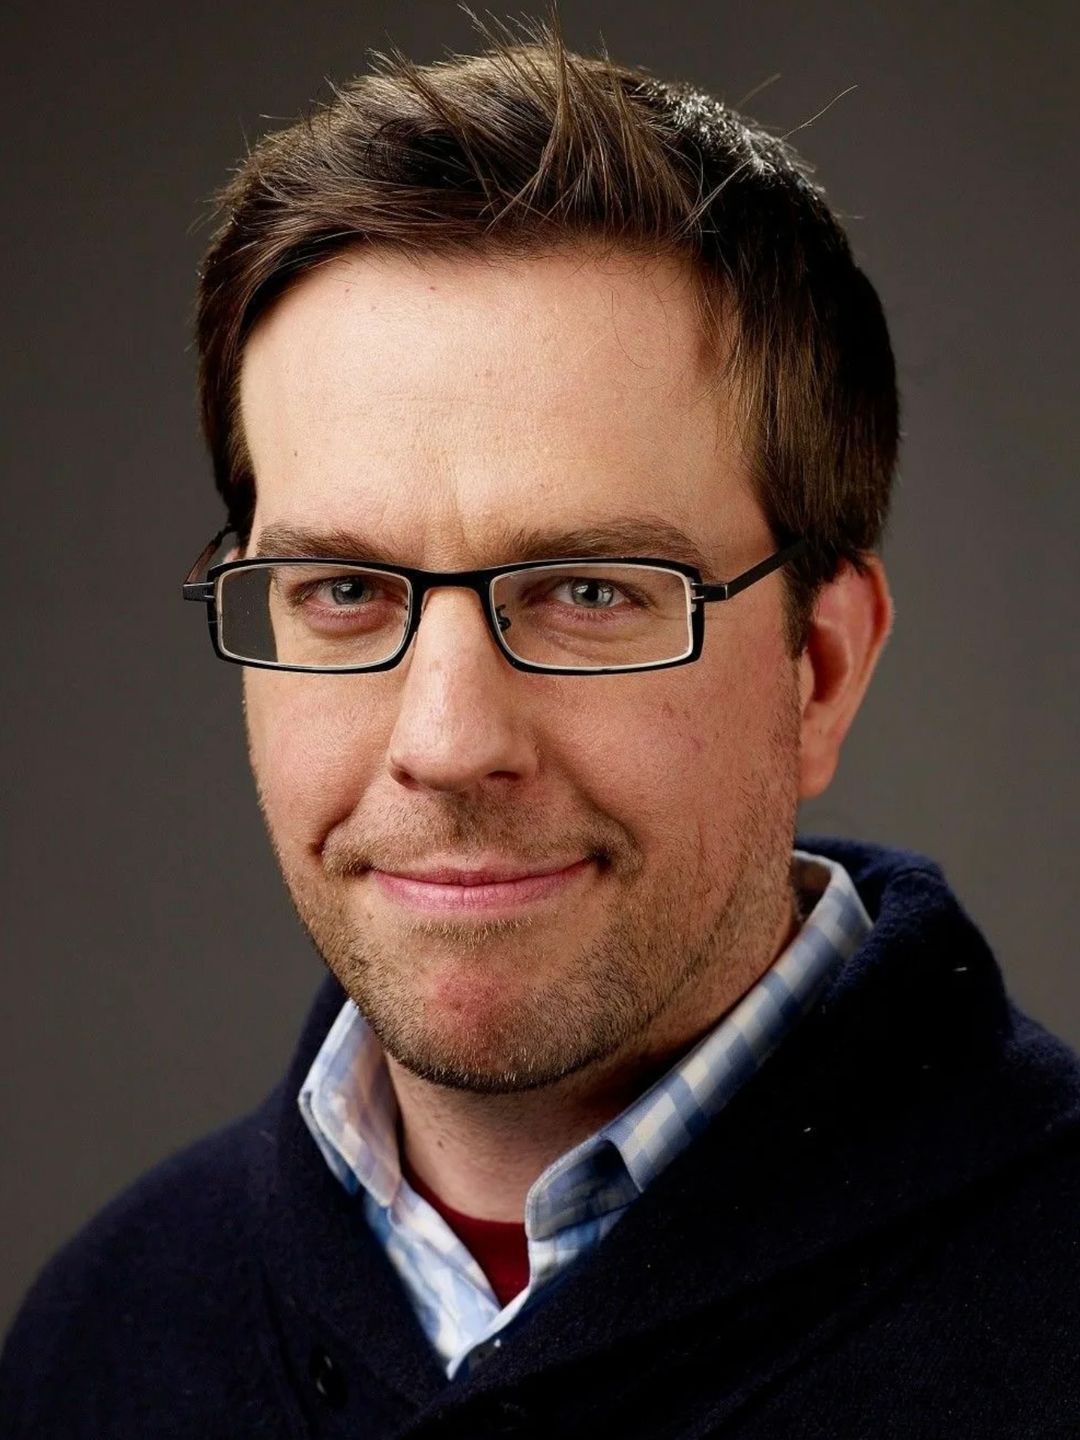 Ed Helms who is his father